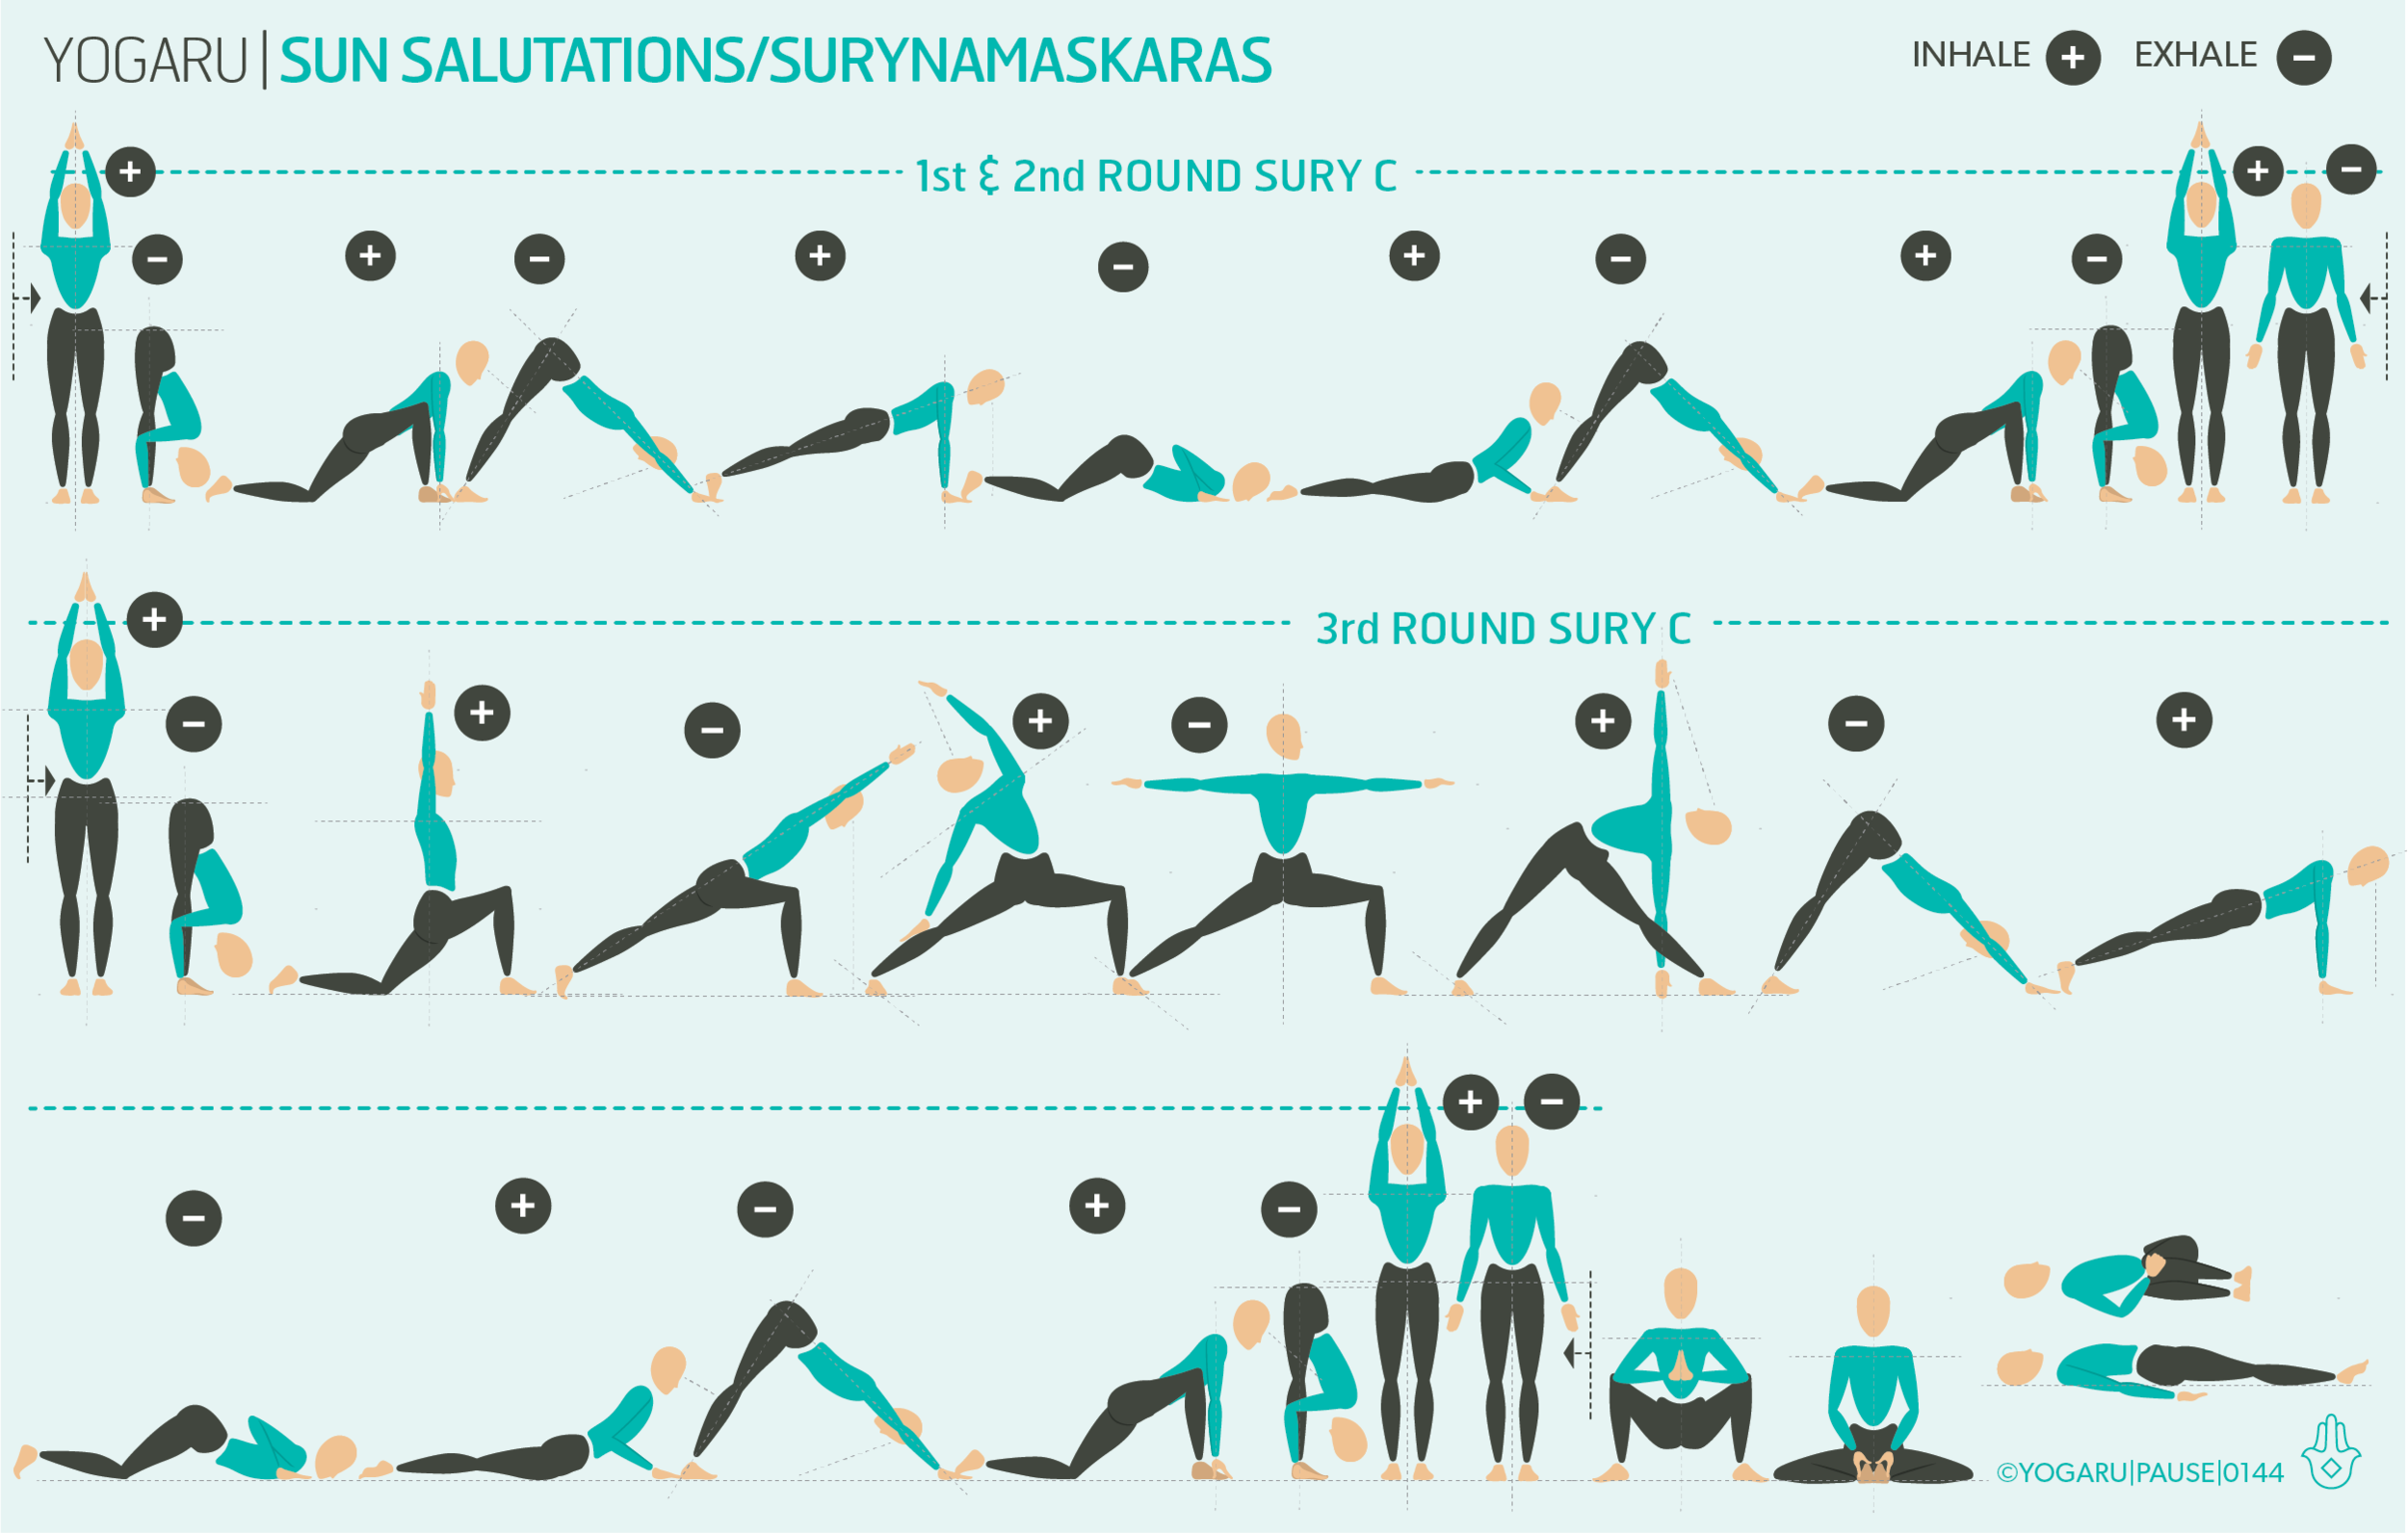 Sun Salutation A Versus Sun Salutation B: The Difference You Should Know